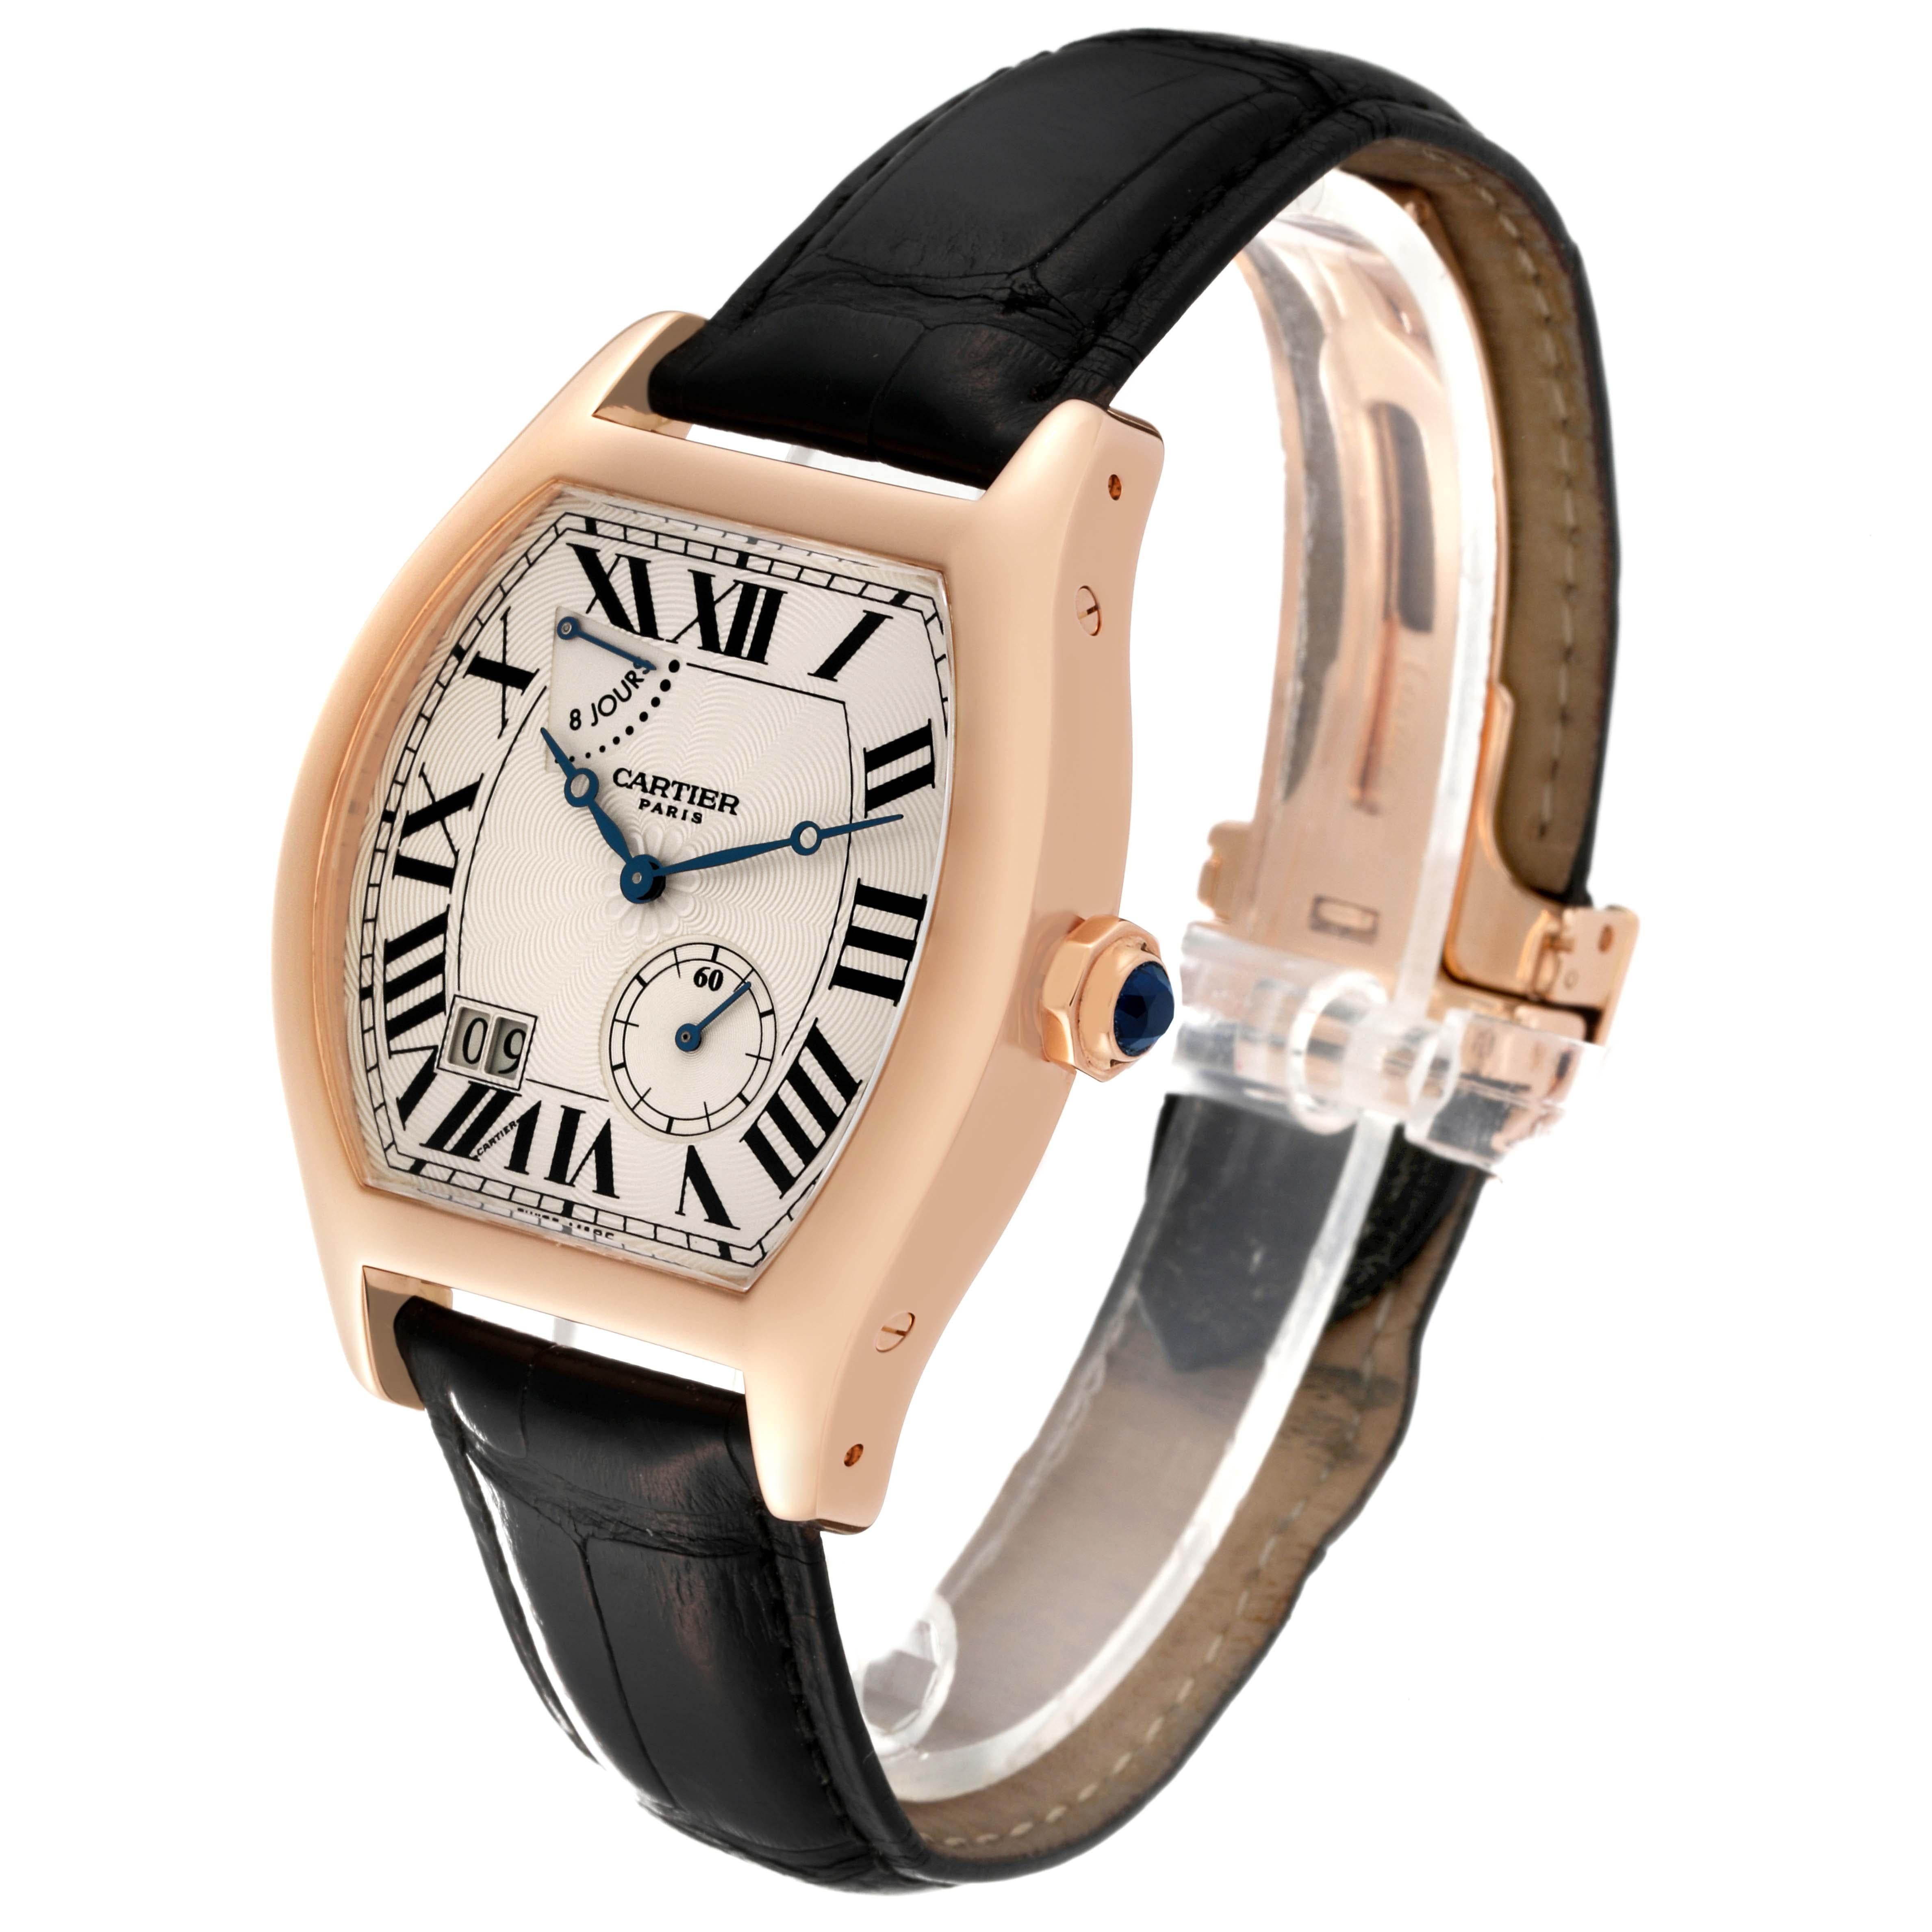 Cartier Tortue Privee Rose Gold 8 Day Power Reserve Mens Watch W1545851 For Sale 1